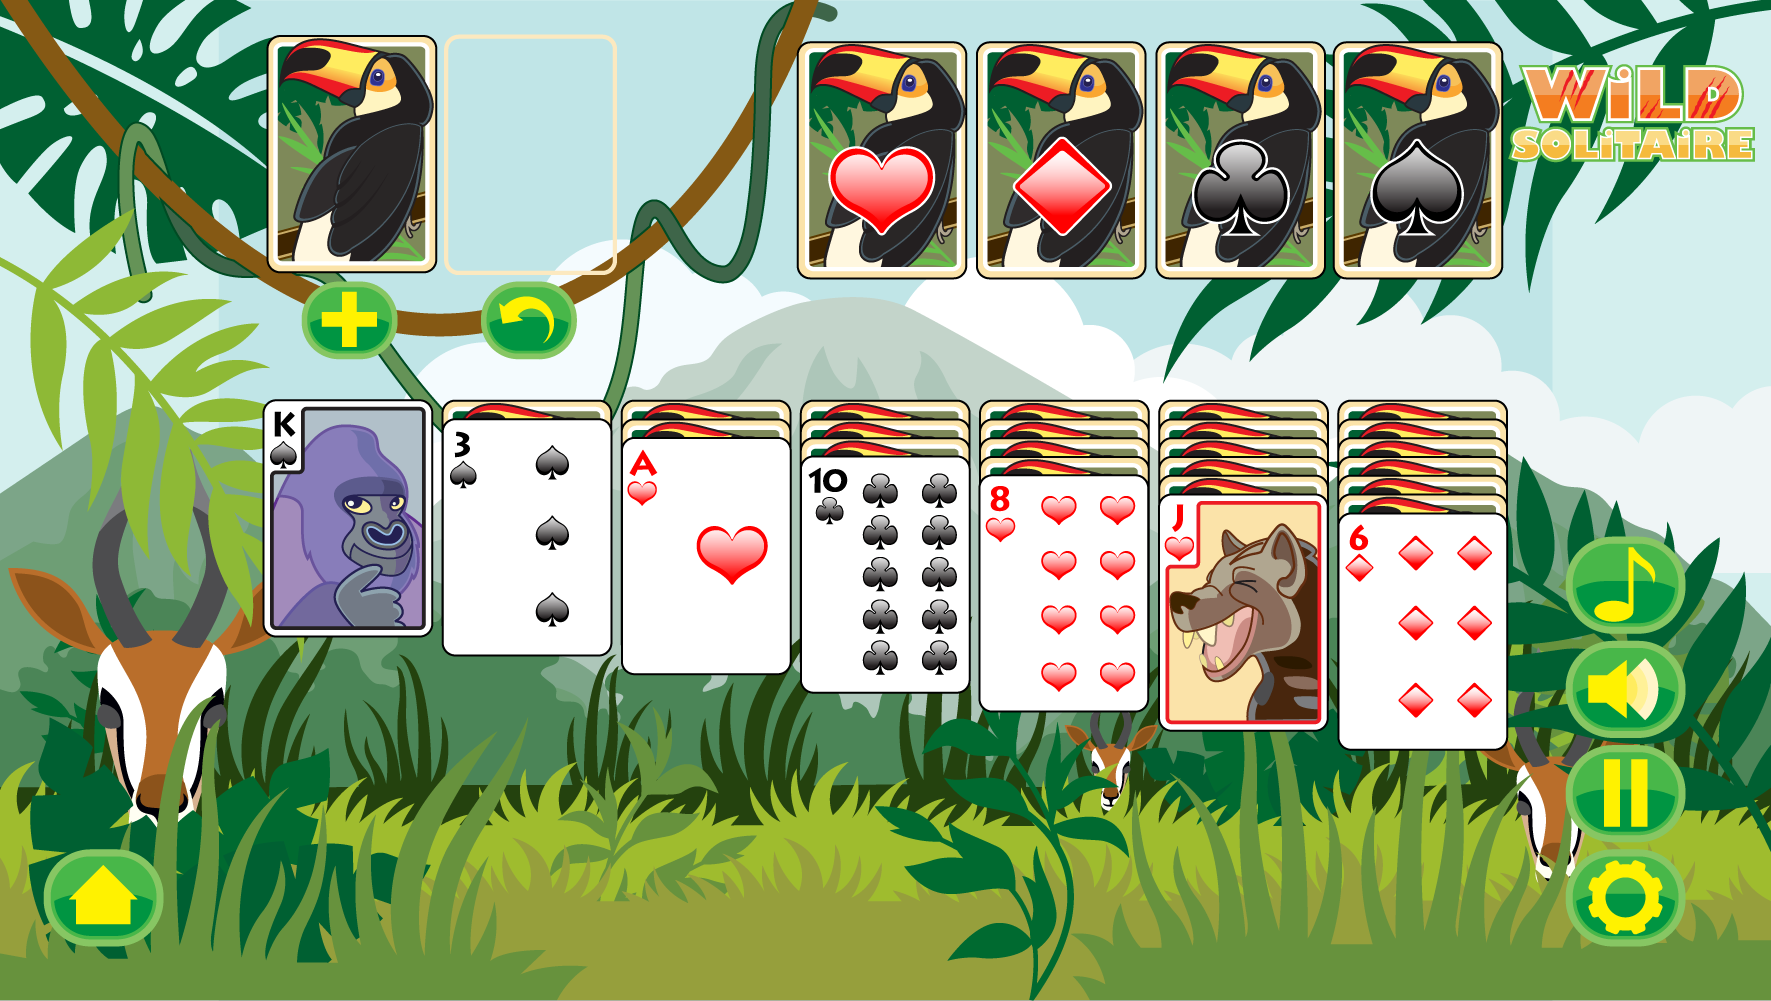 Wild Solitaire Game Screen